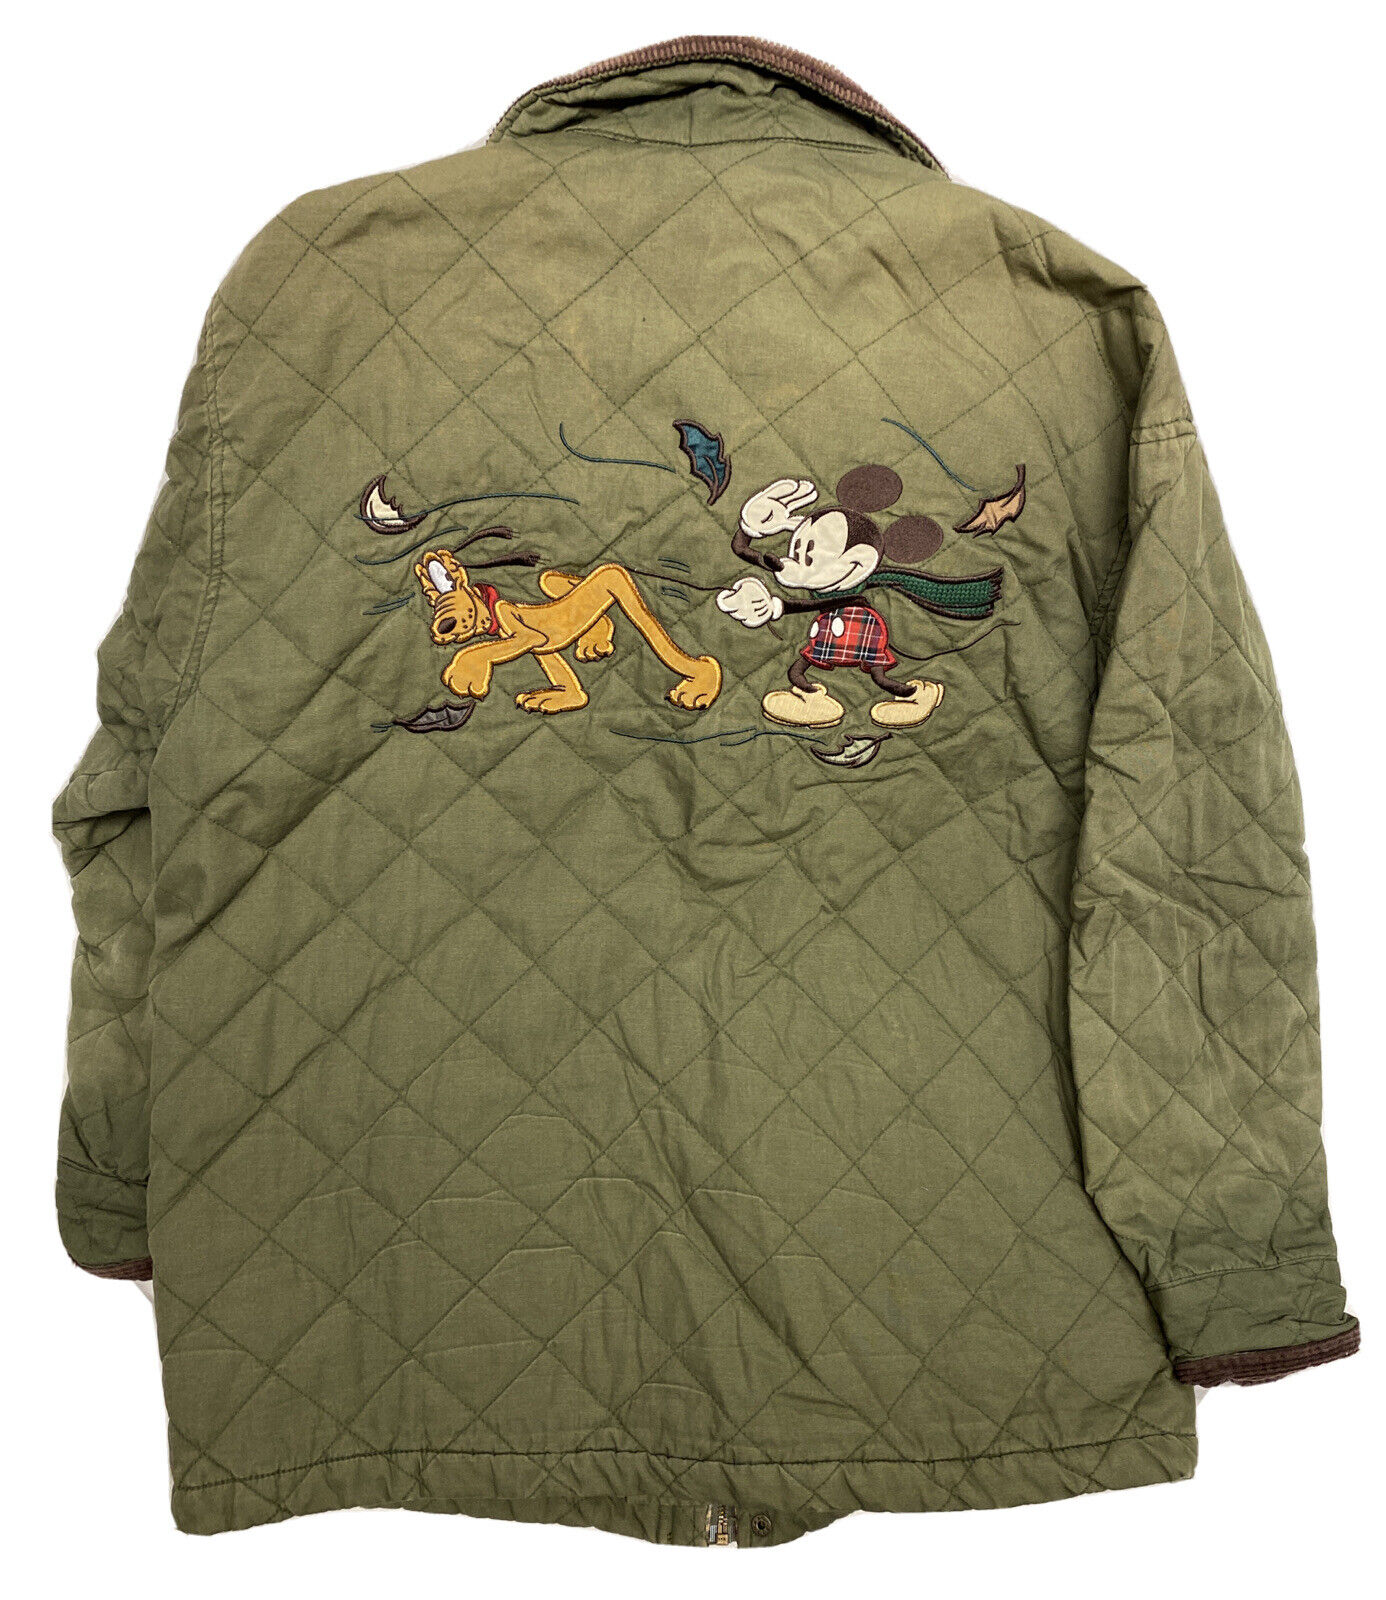 Vintage Rare Disney Store Hunting Quilted Chore Jacket Adult M *See Description*